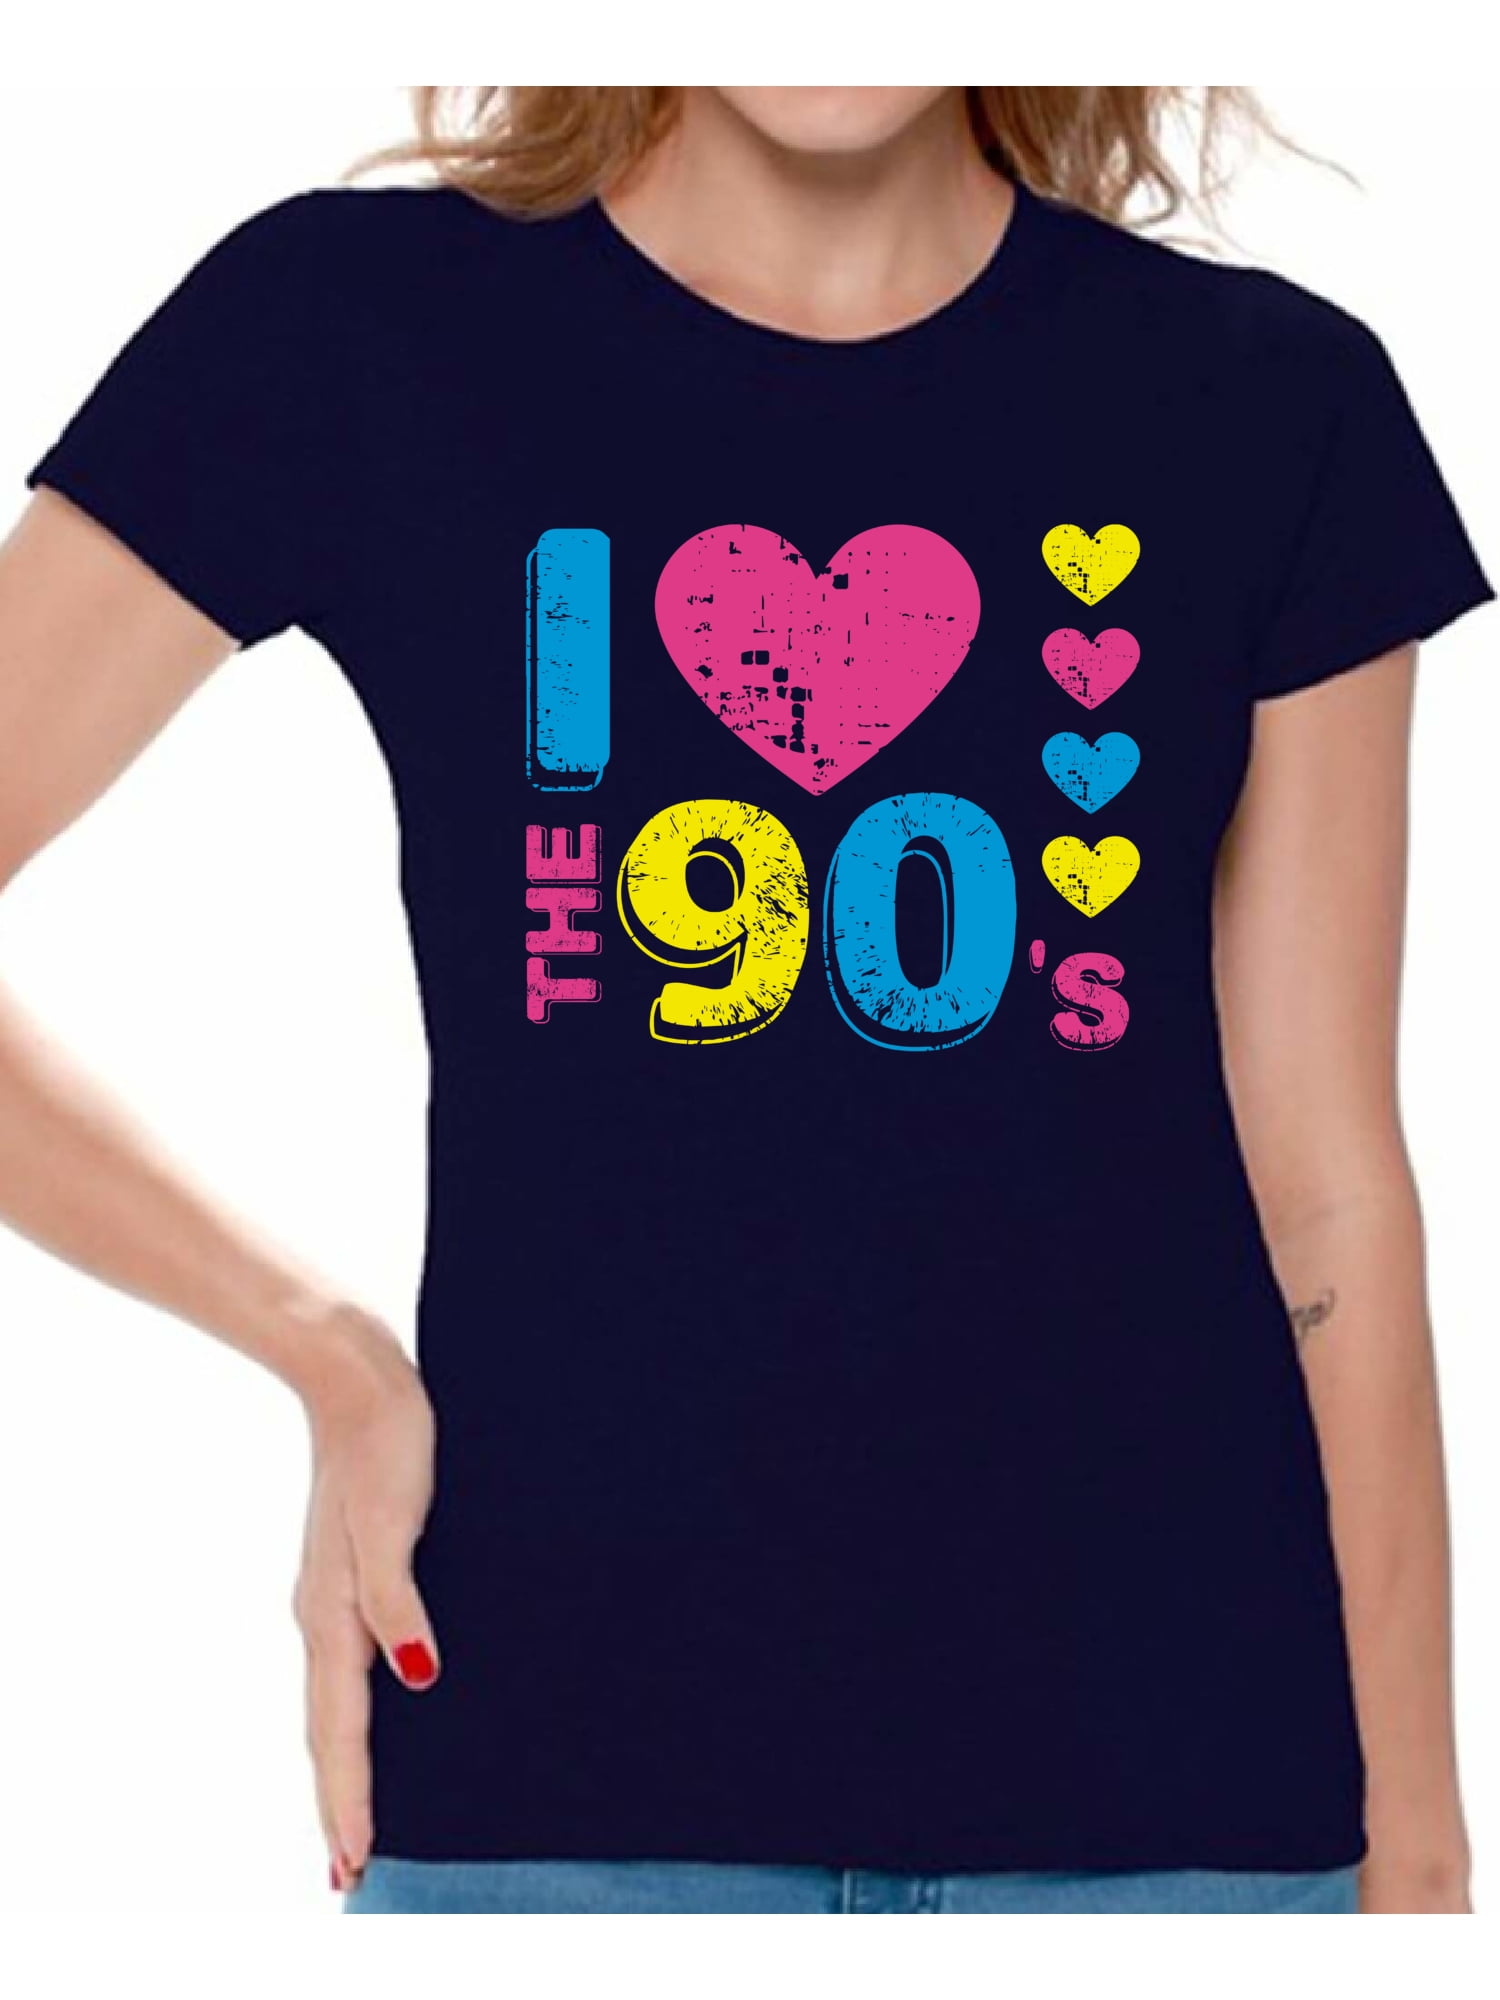 awkward-styles-awkward-styles-i-love-the-90-s-women-s-t-shirts-tops-for-90s-fans-90s-costumes